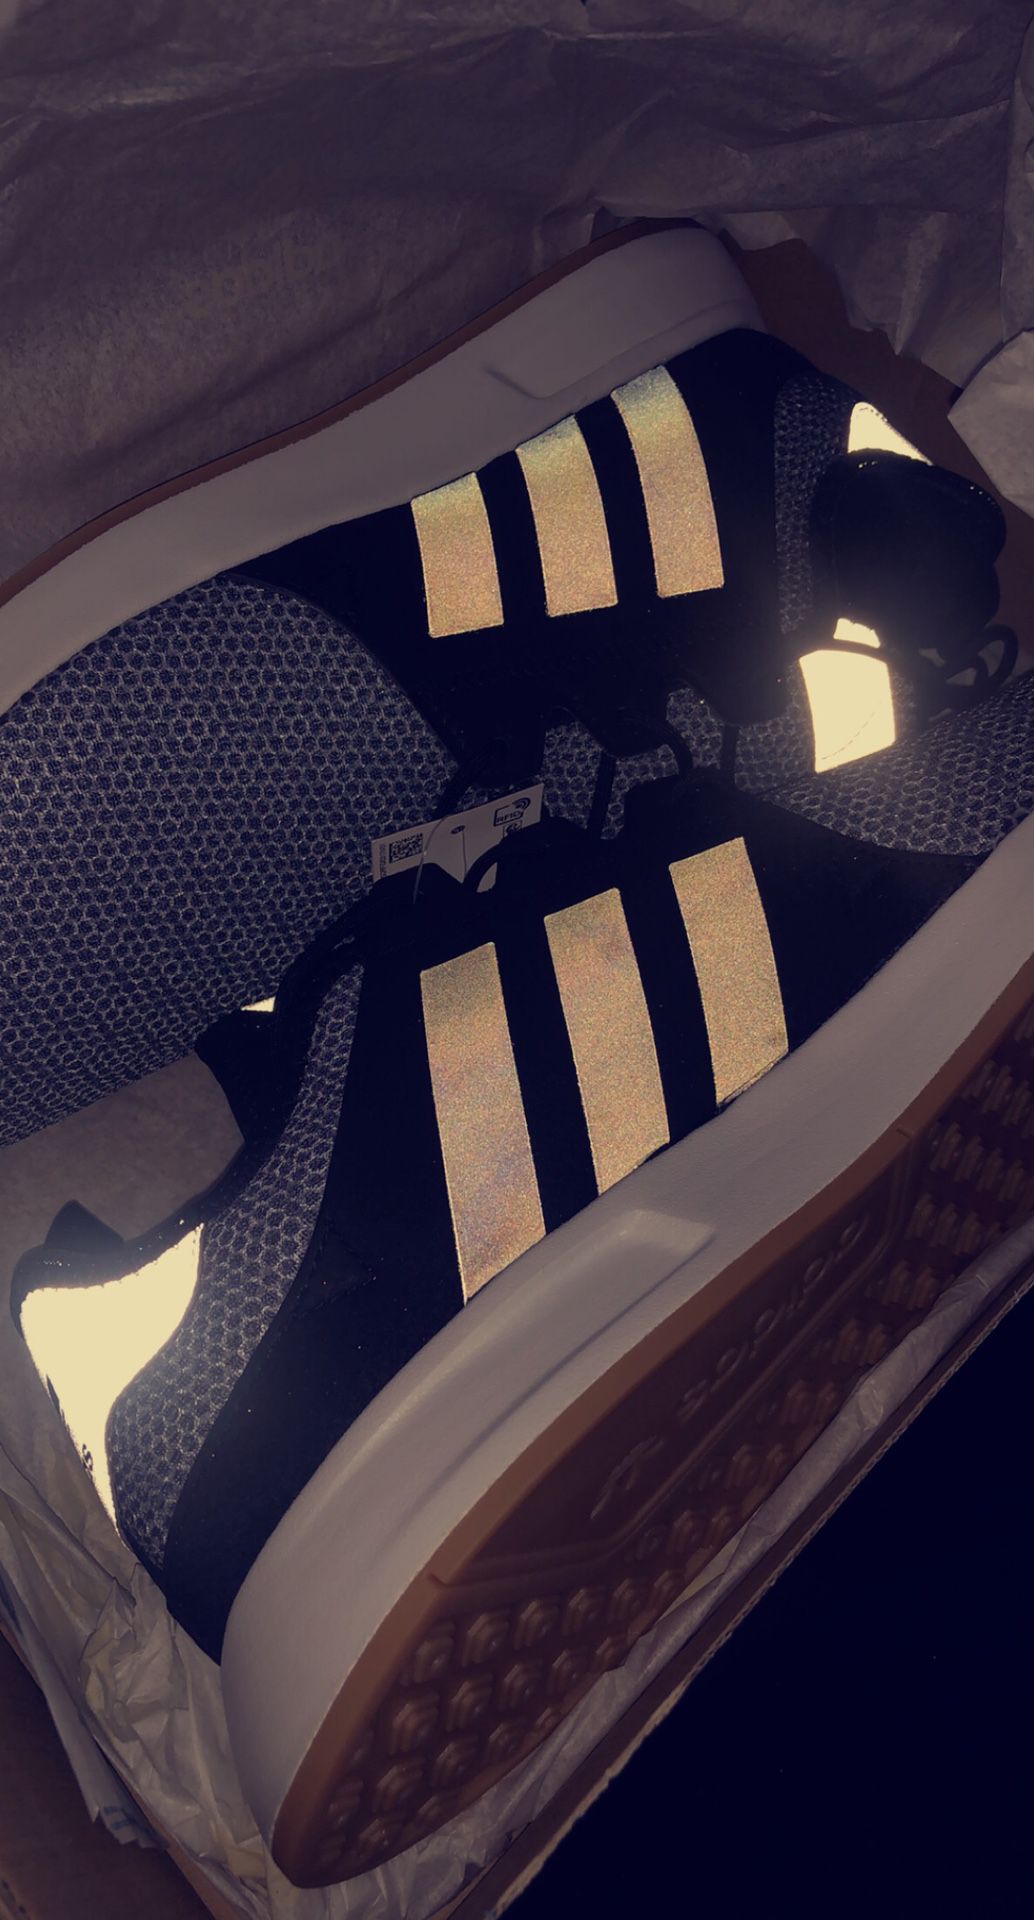 Adidas’s Shoes